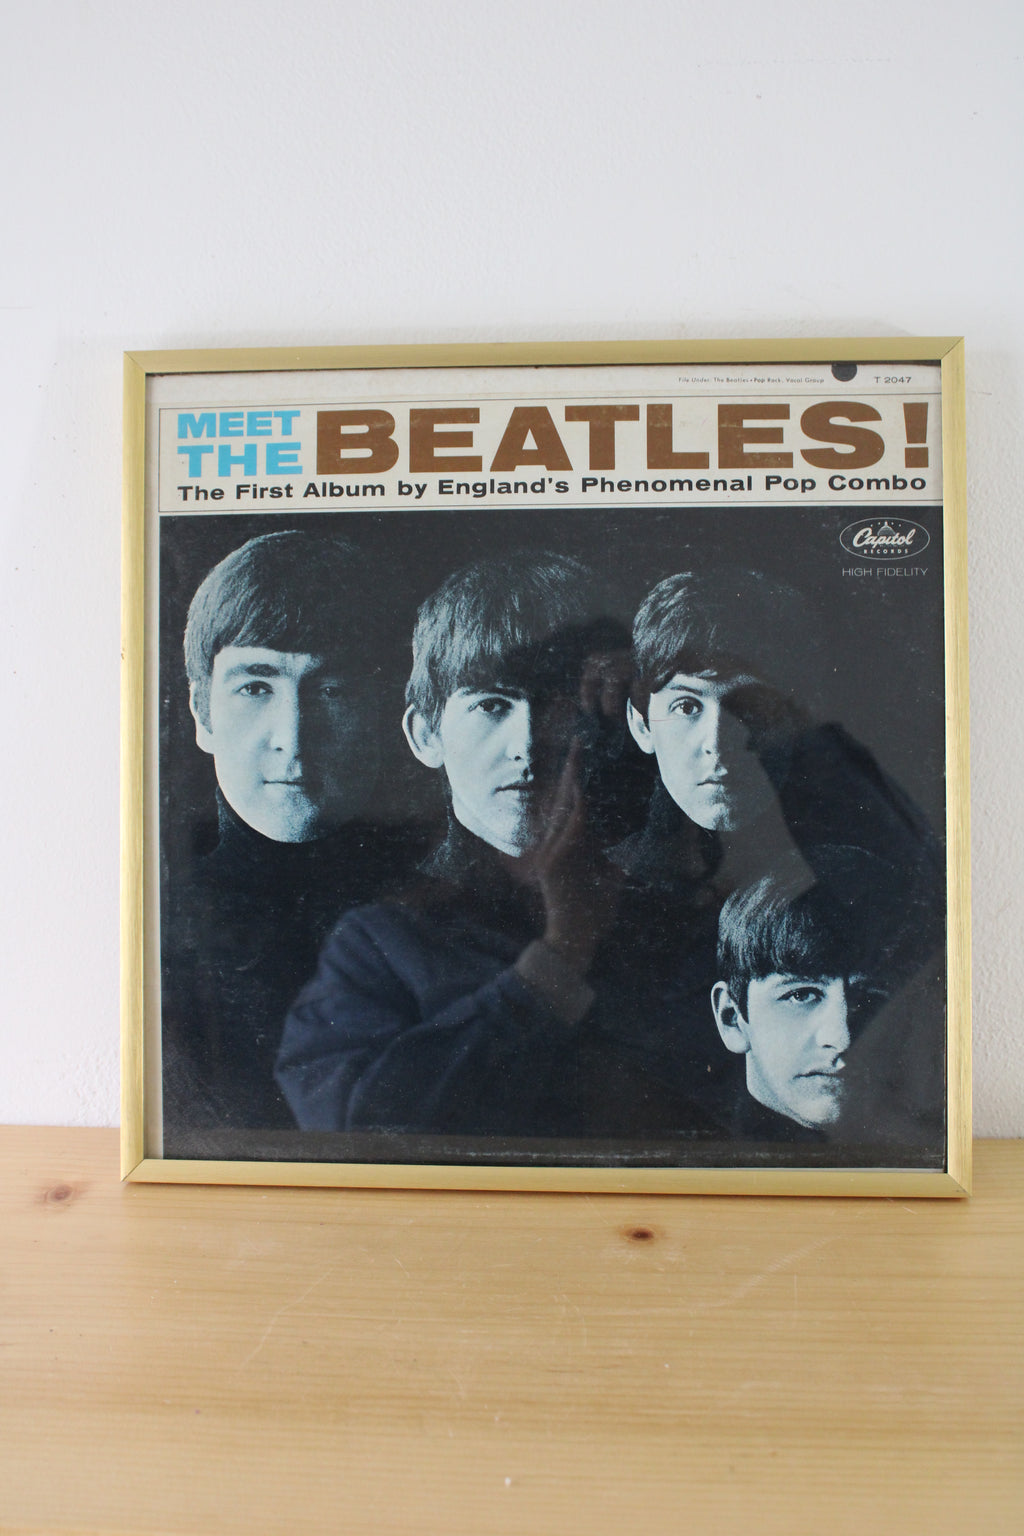 Meet The Beatles: The First Album By England's Phenomenal Pop Combo Framed Vinyl Record